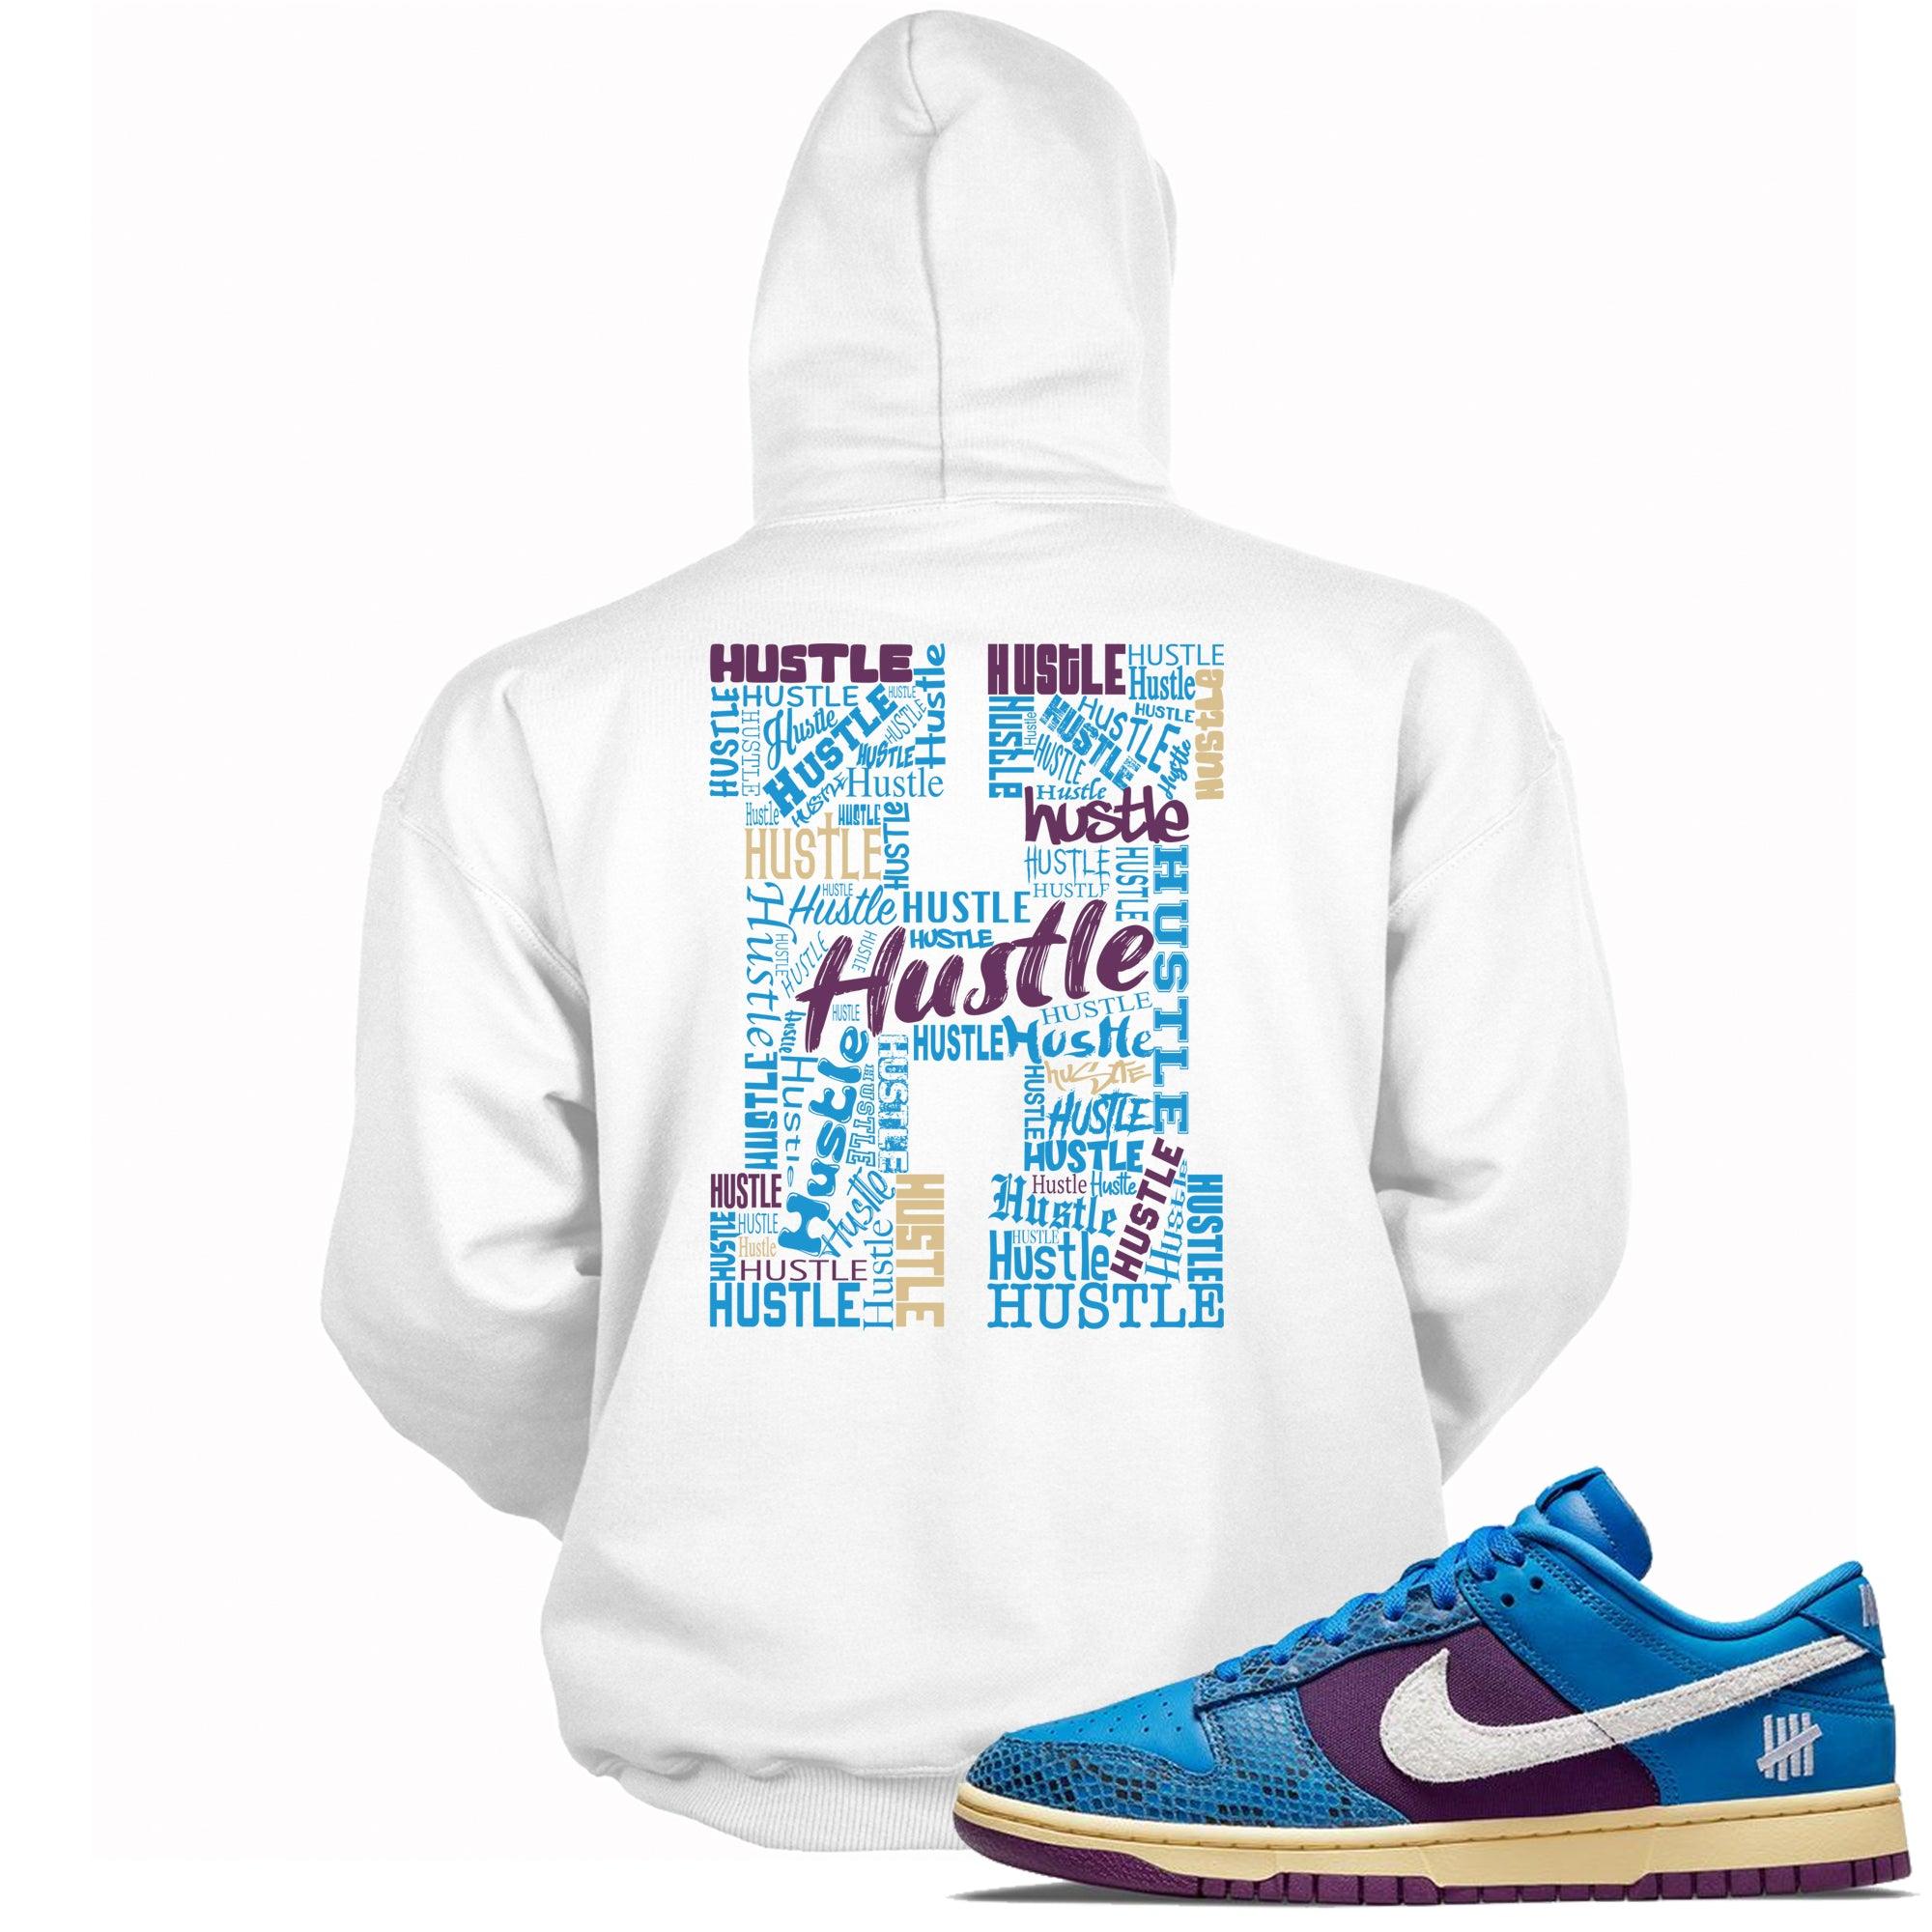 H For Hustle Hoodie Nike Dunks Low Undefeated 5 On It Dunk vs AF1 photo